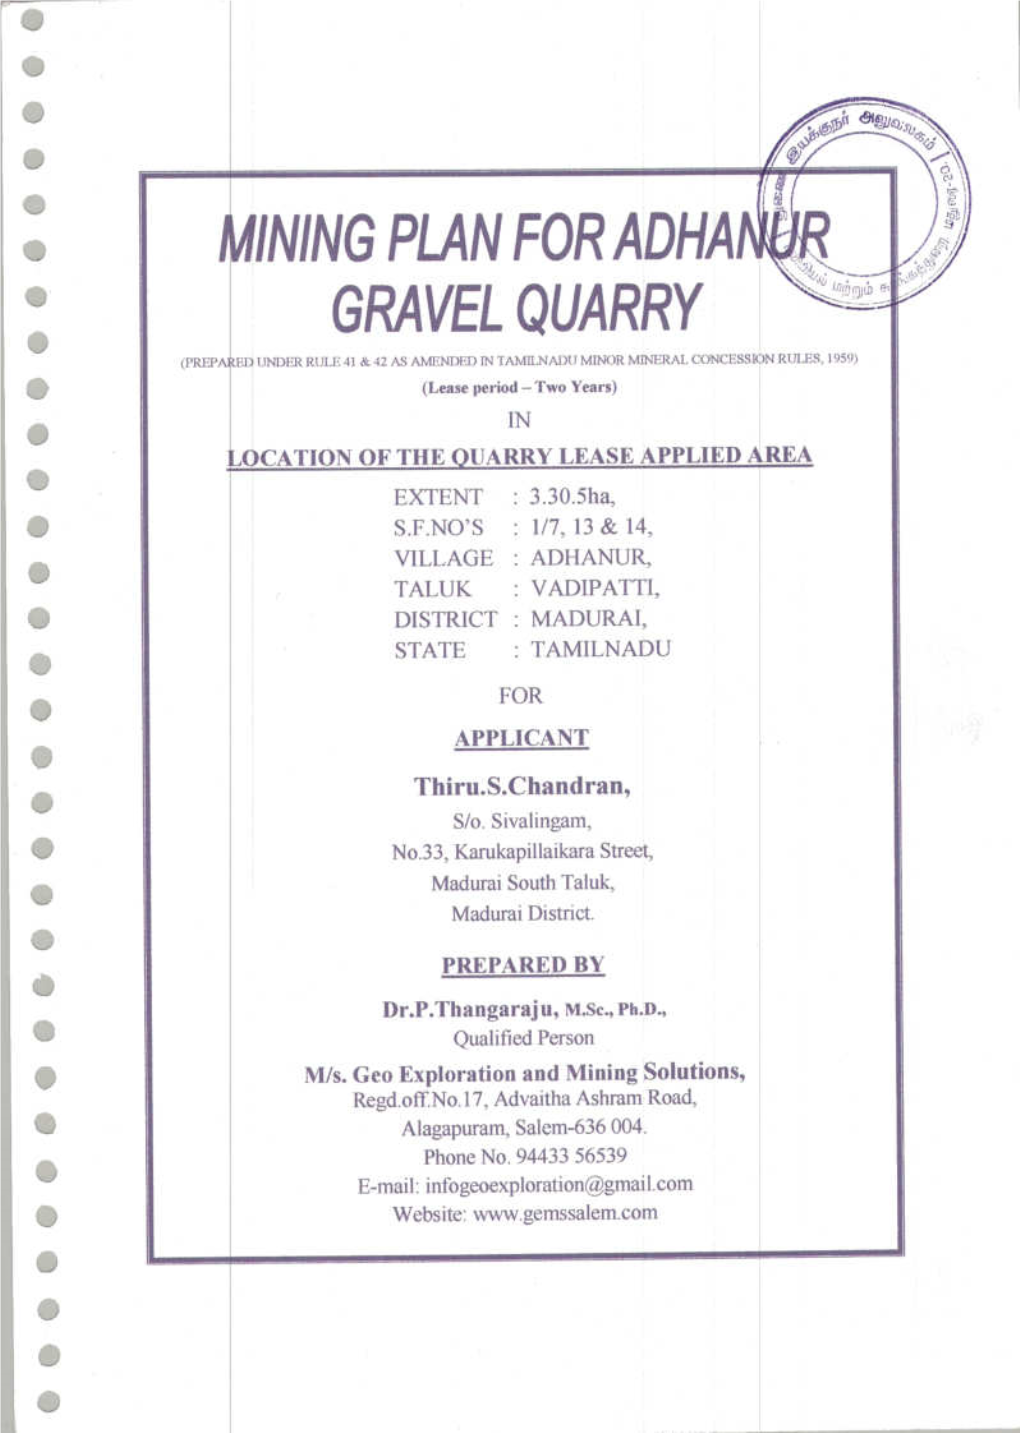 Annexure-Approved Mining Plan File